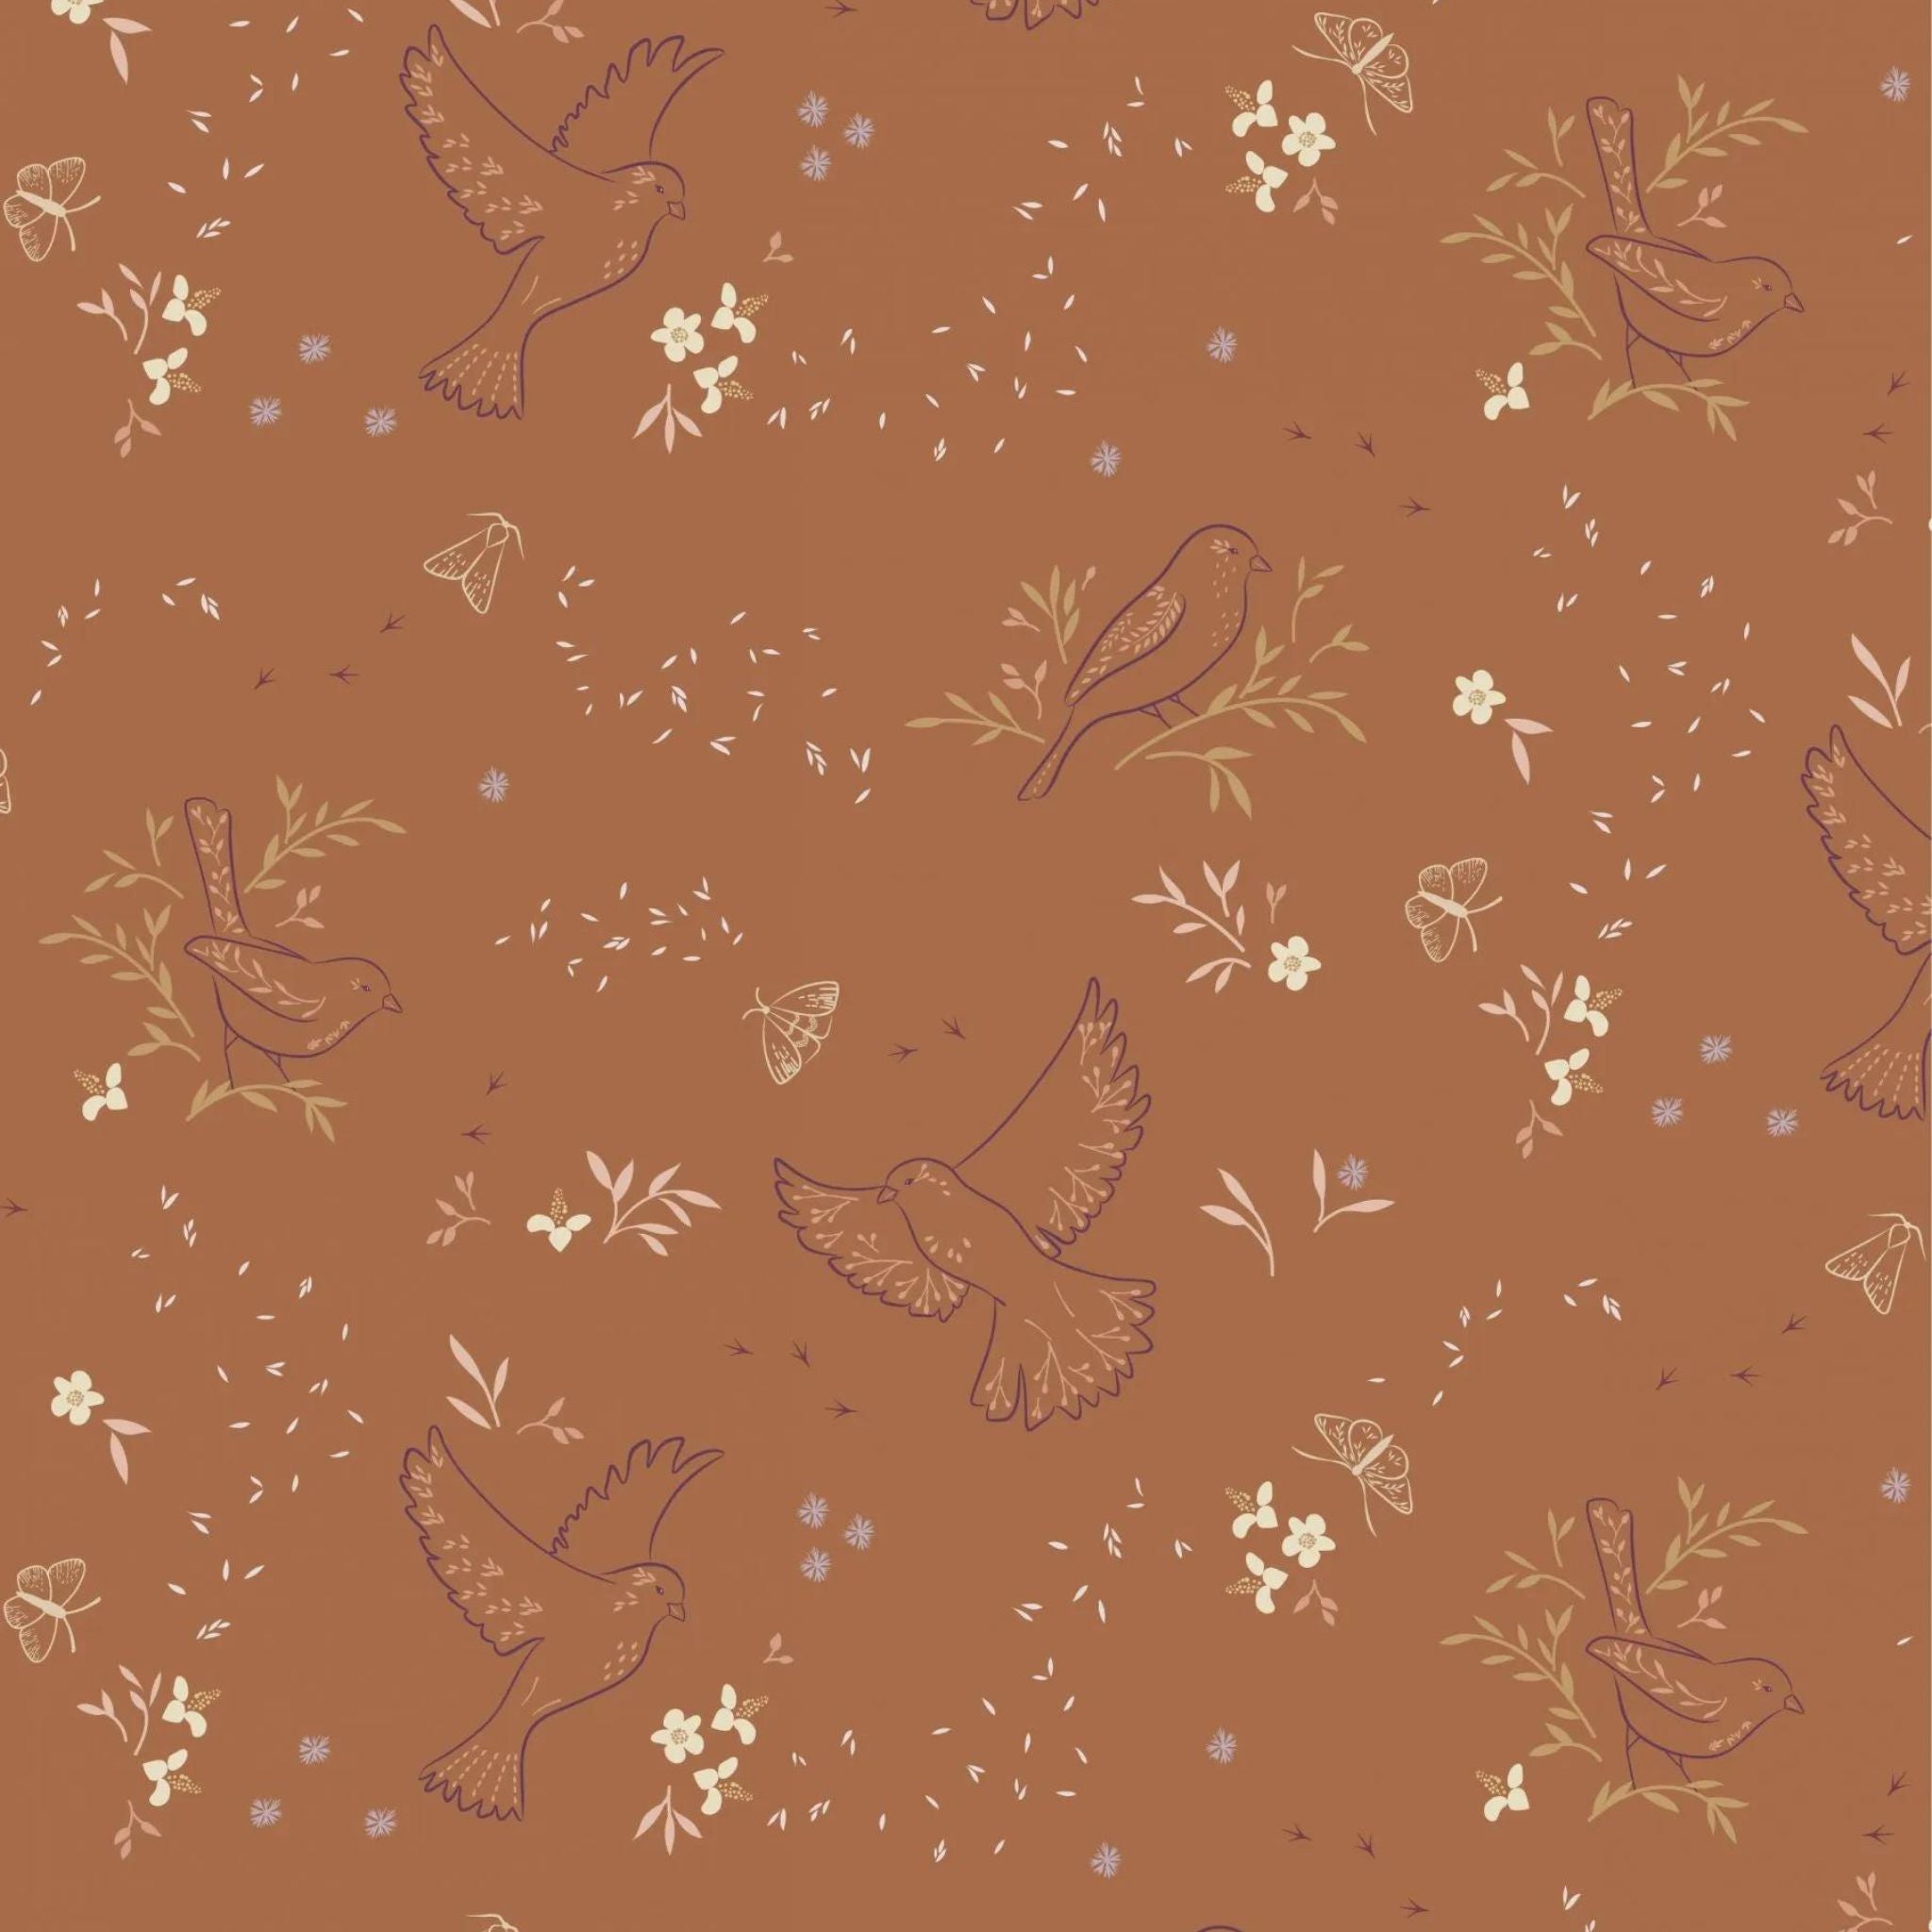 Birds and Seeds on Rusty Orange cotton fabric - Meadowside by Lewis & Irene